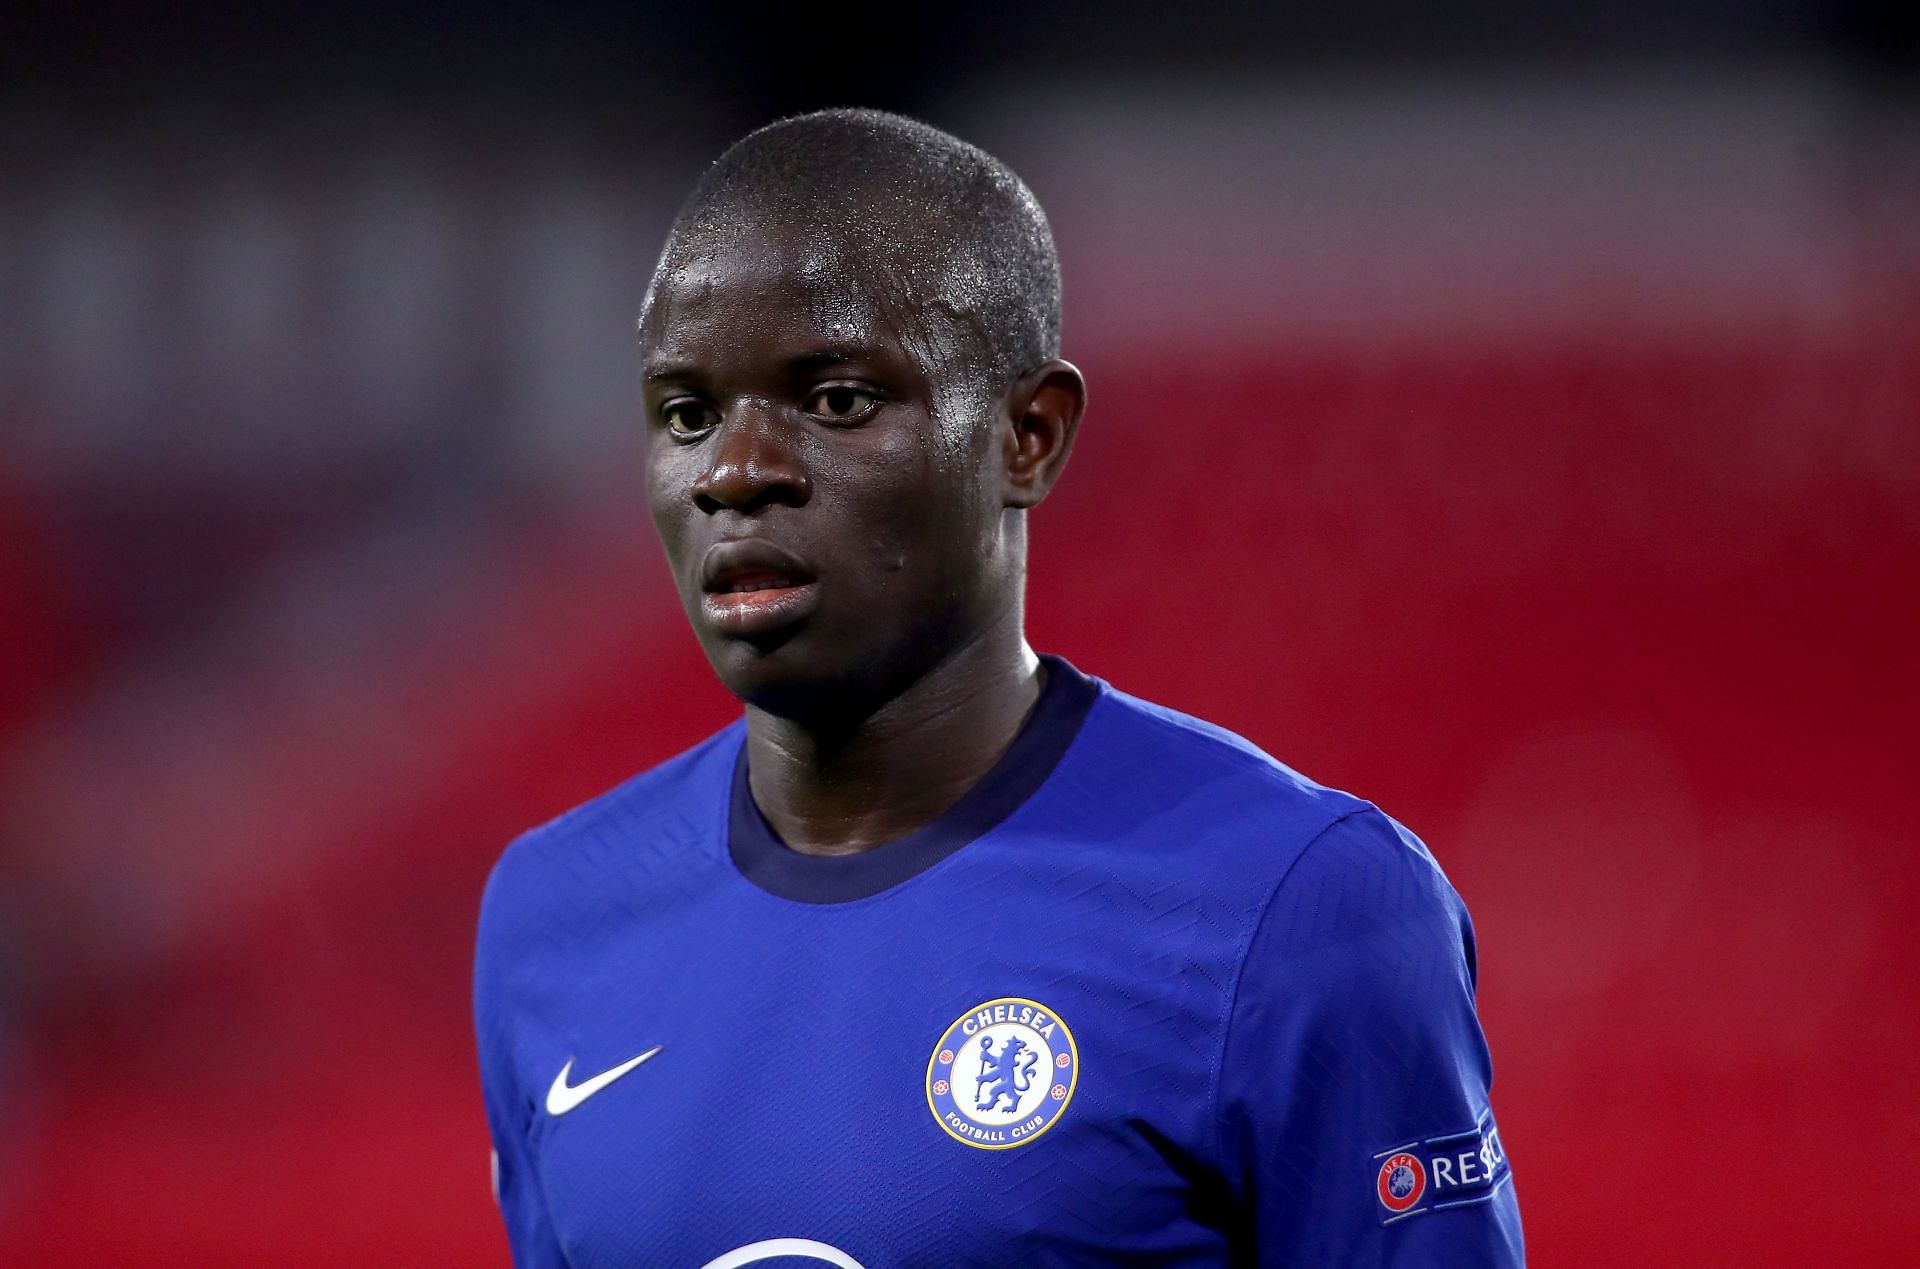 Barcelona are interested in Kante.